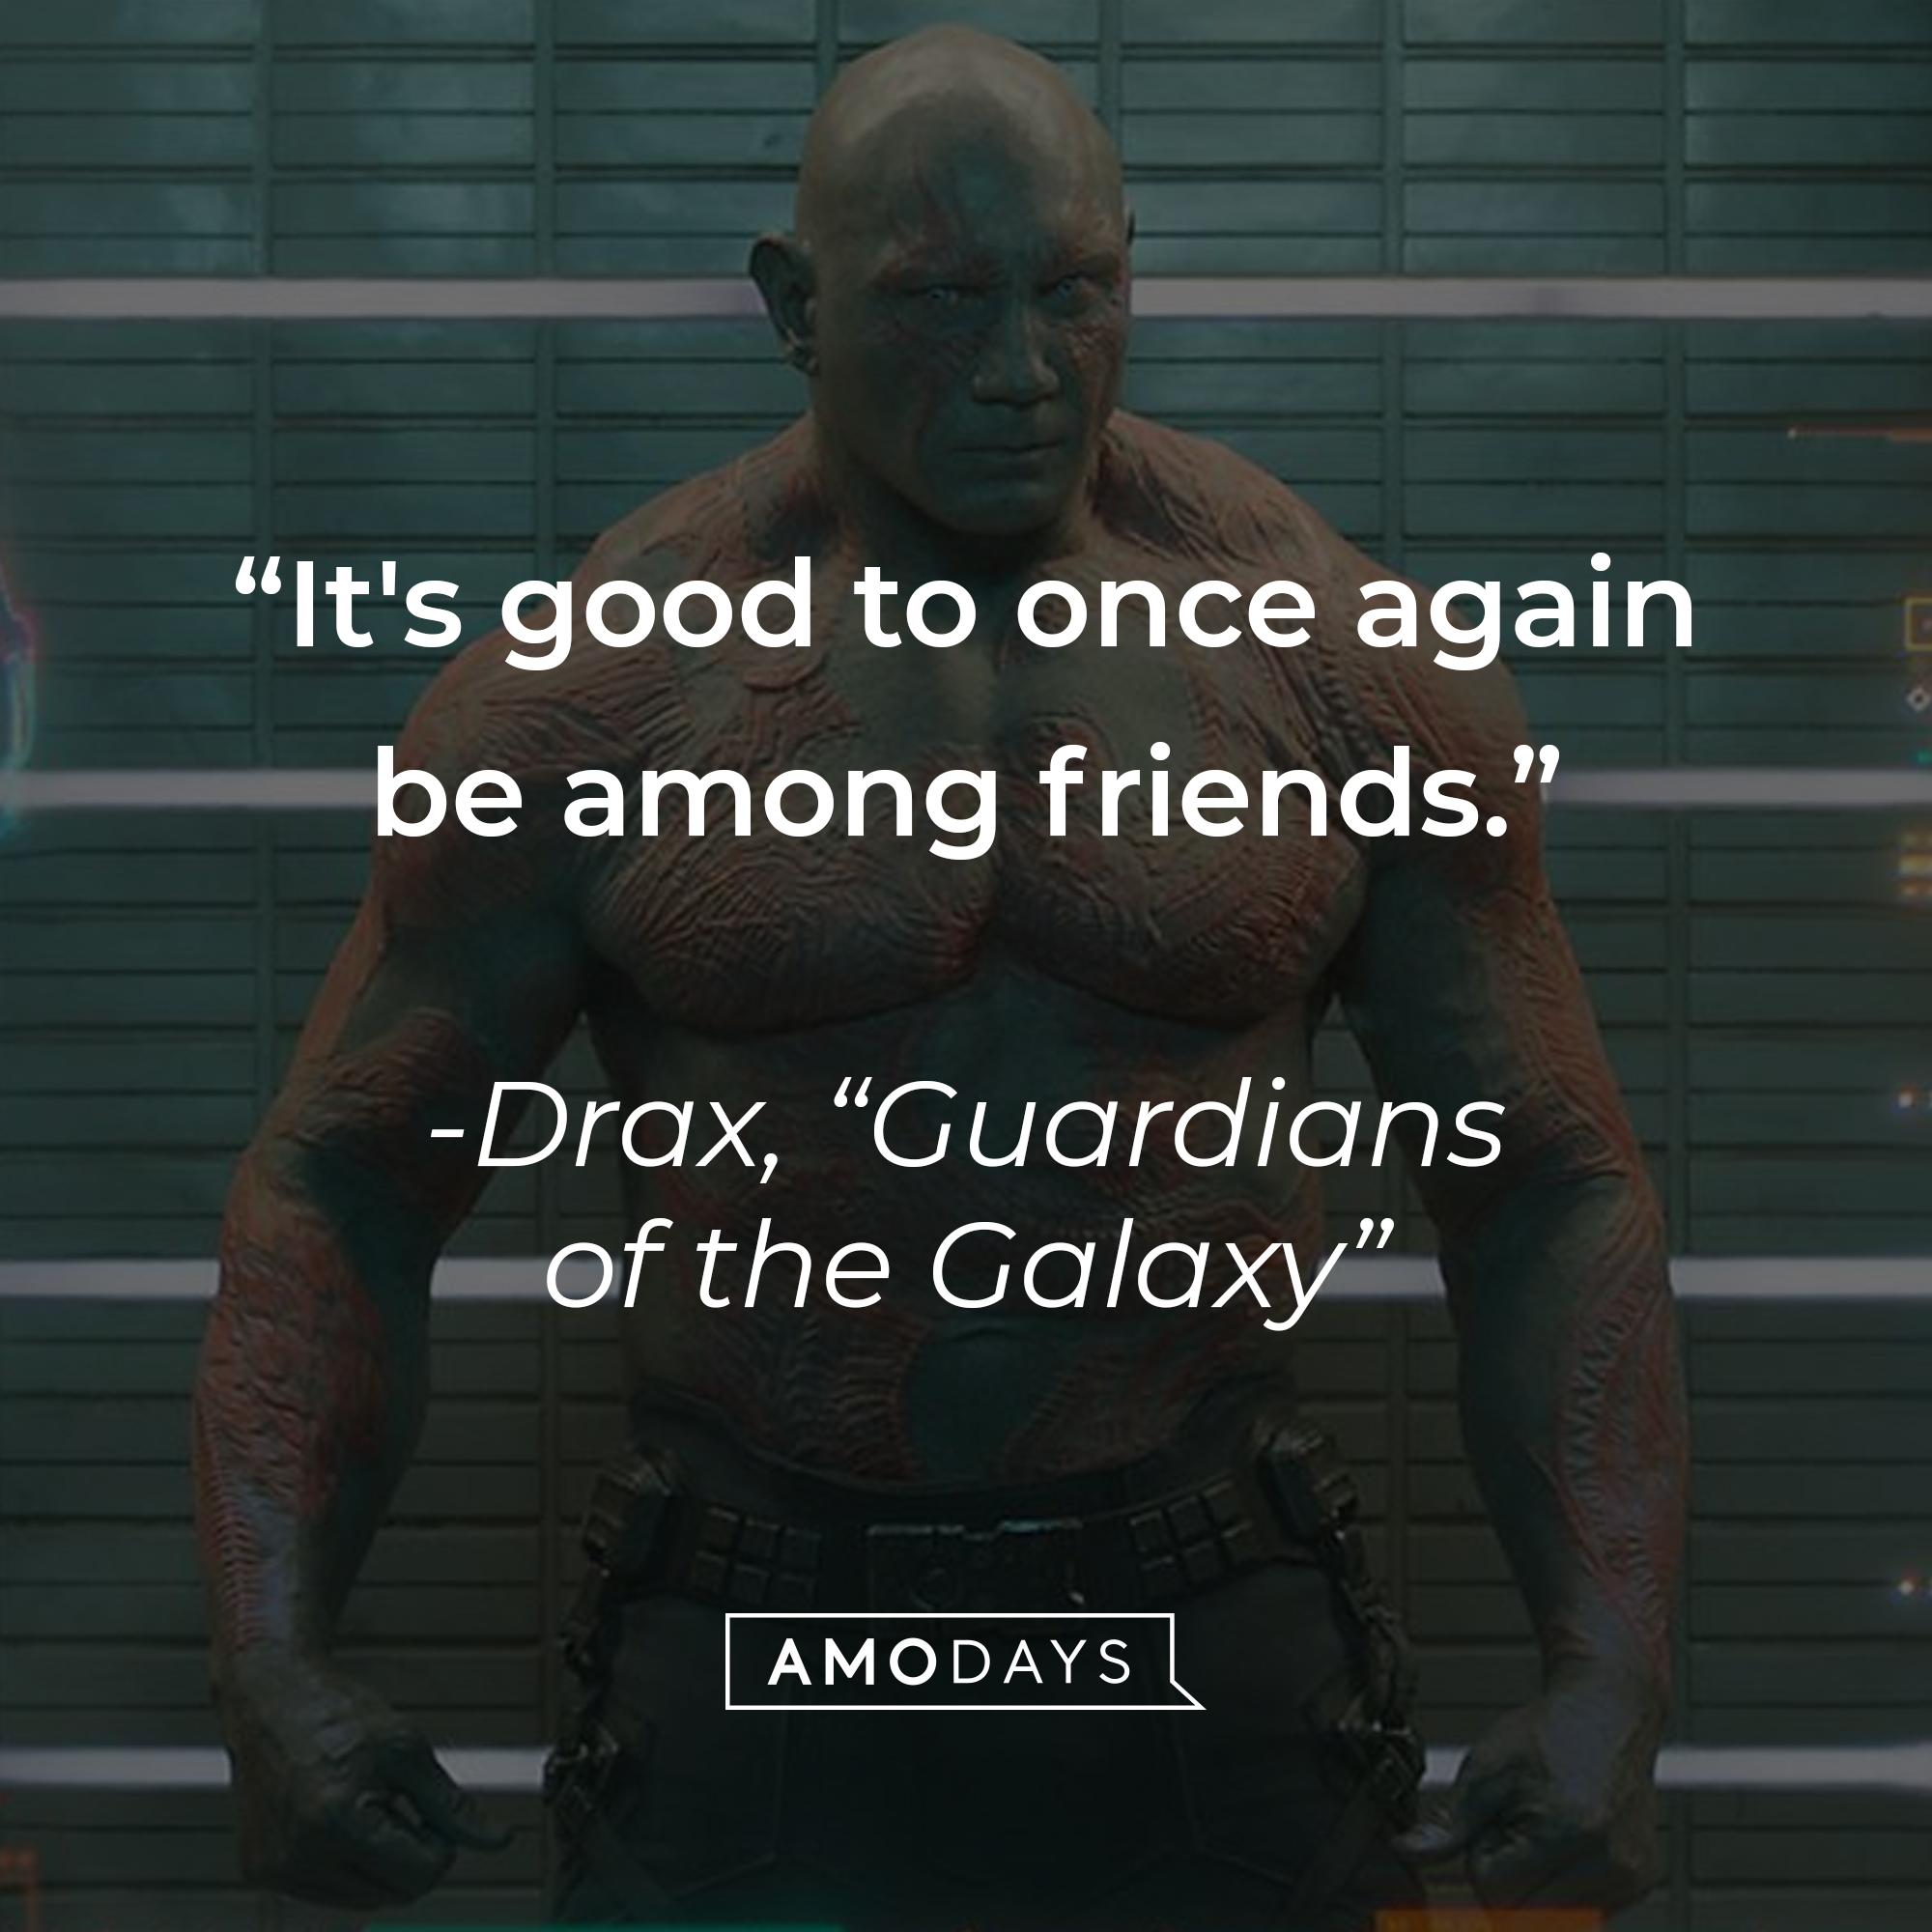 Drax with his quote: "It's good to once again be among friends." | Source: Facebook.com/guardiansofthegalaxy